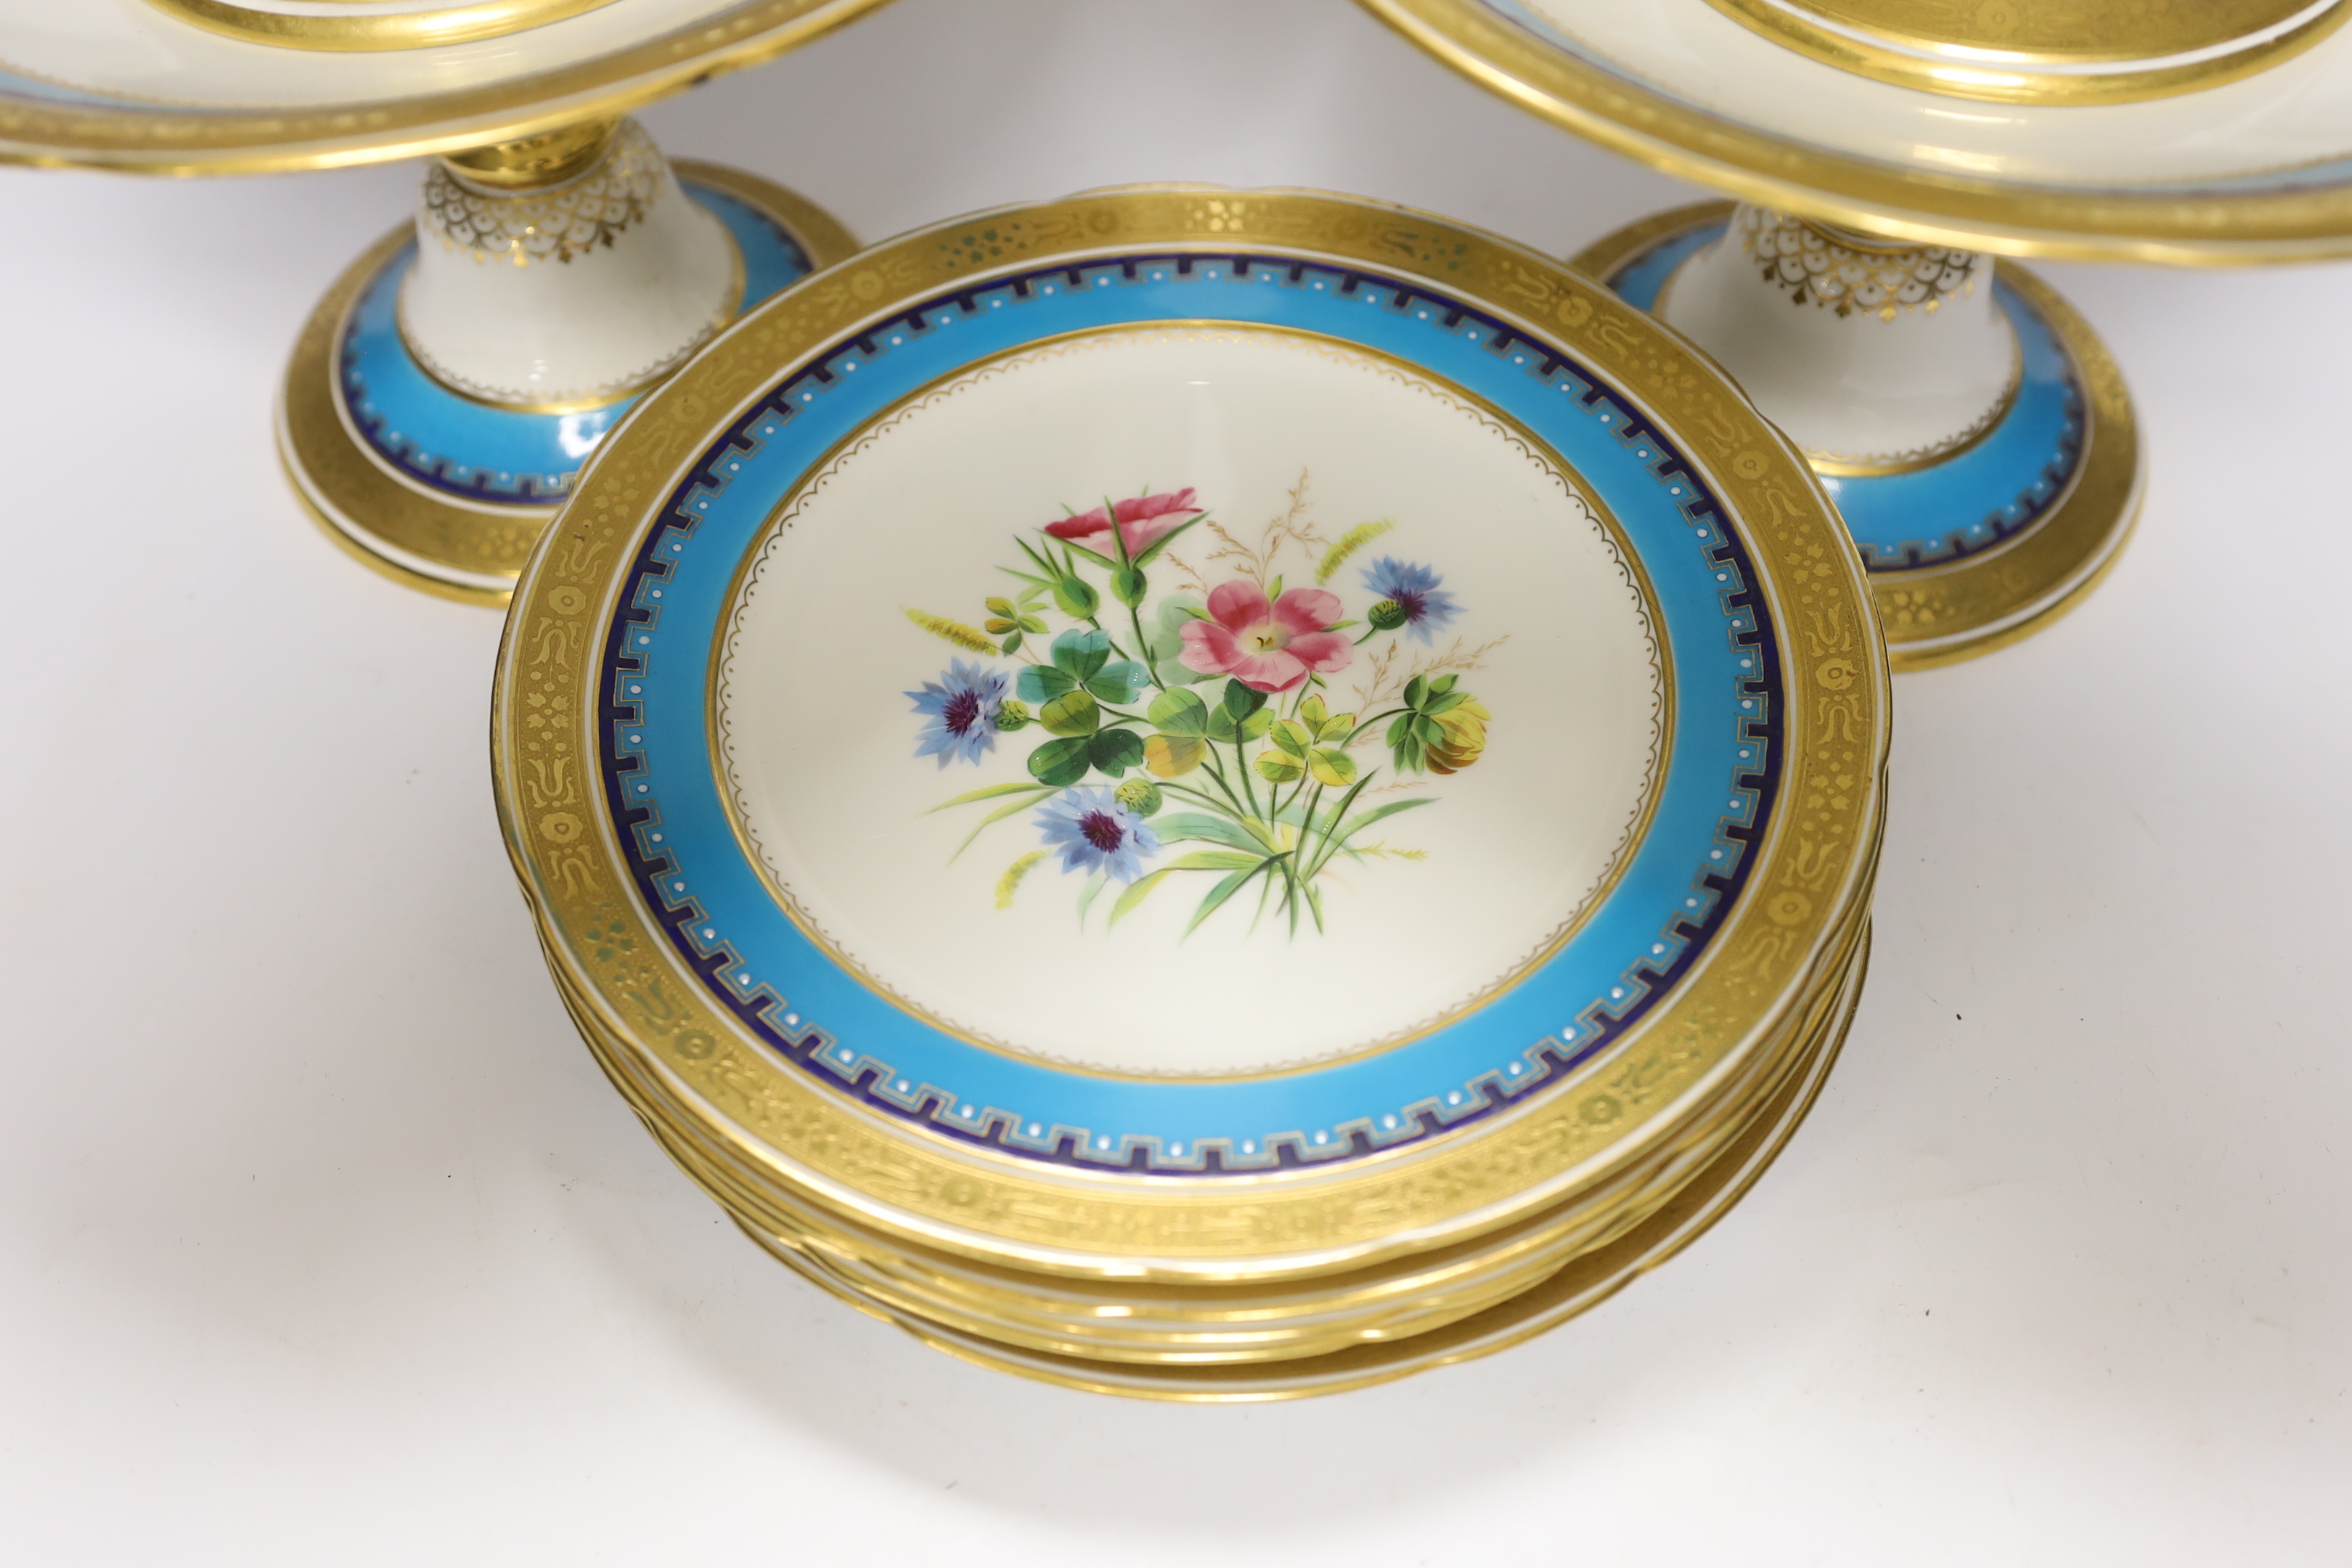 A 19th century Minton porcelain dessert service with gilt and floral decoration, twelve plates and two pairs of various height comports, tallest 16.5cm high